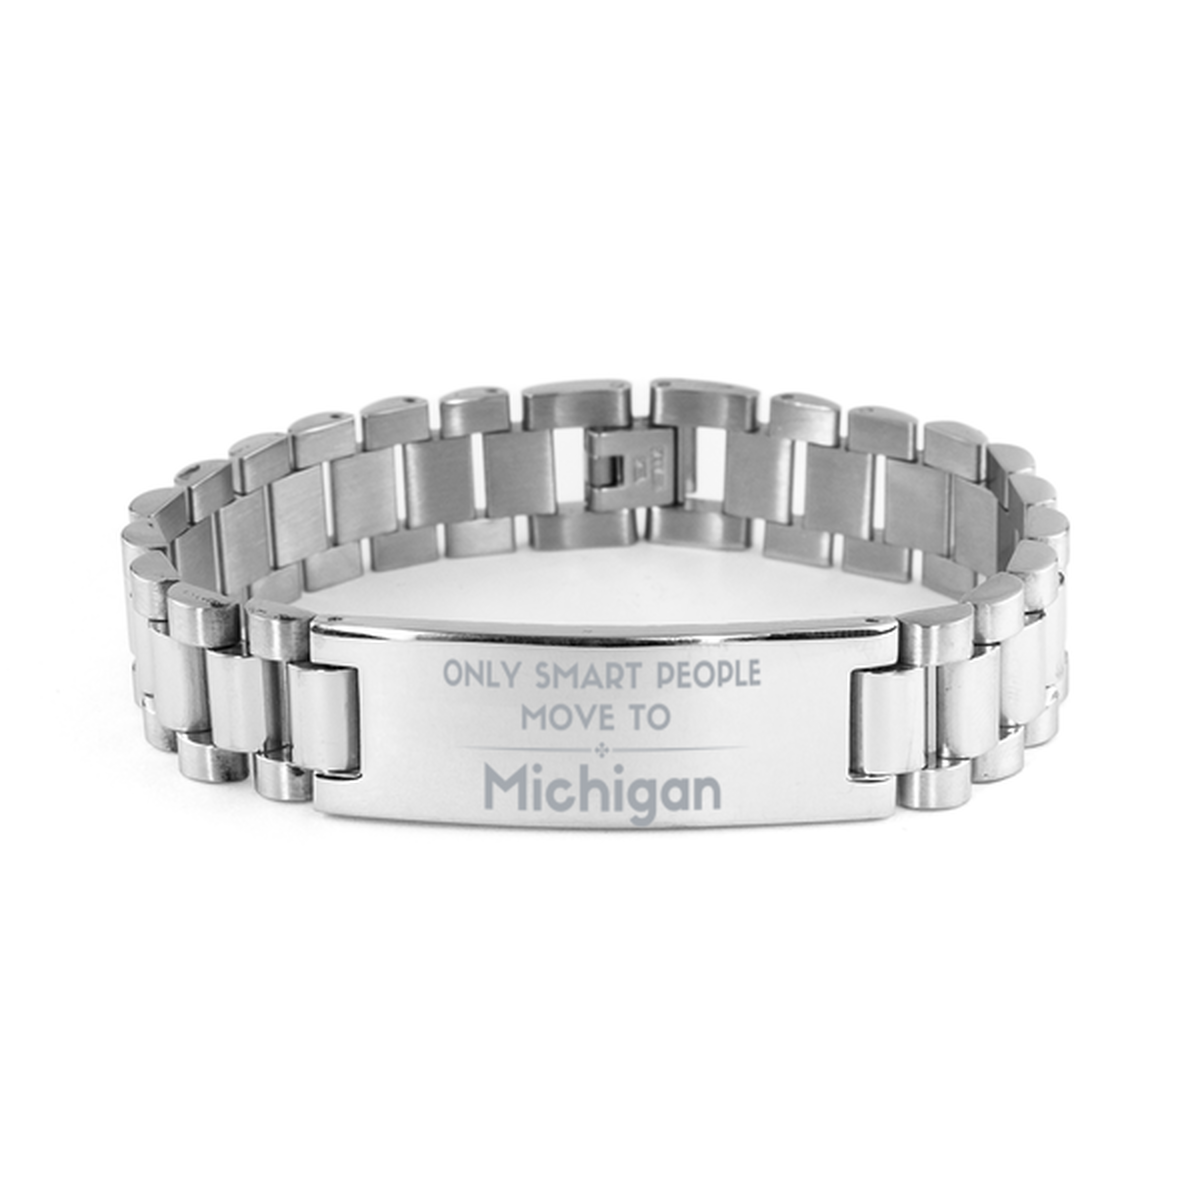 Only smart people move to Michigan Ladder Stainless Steel Bracelet, Gag Gifts For Michigan, Move to Michigan Gifts for Friends Coworker Funny Saying Quote